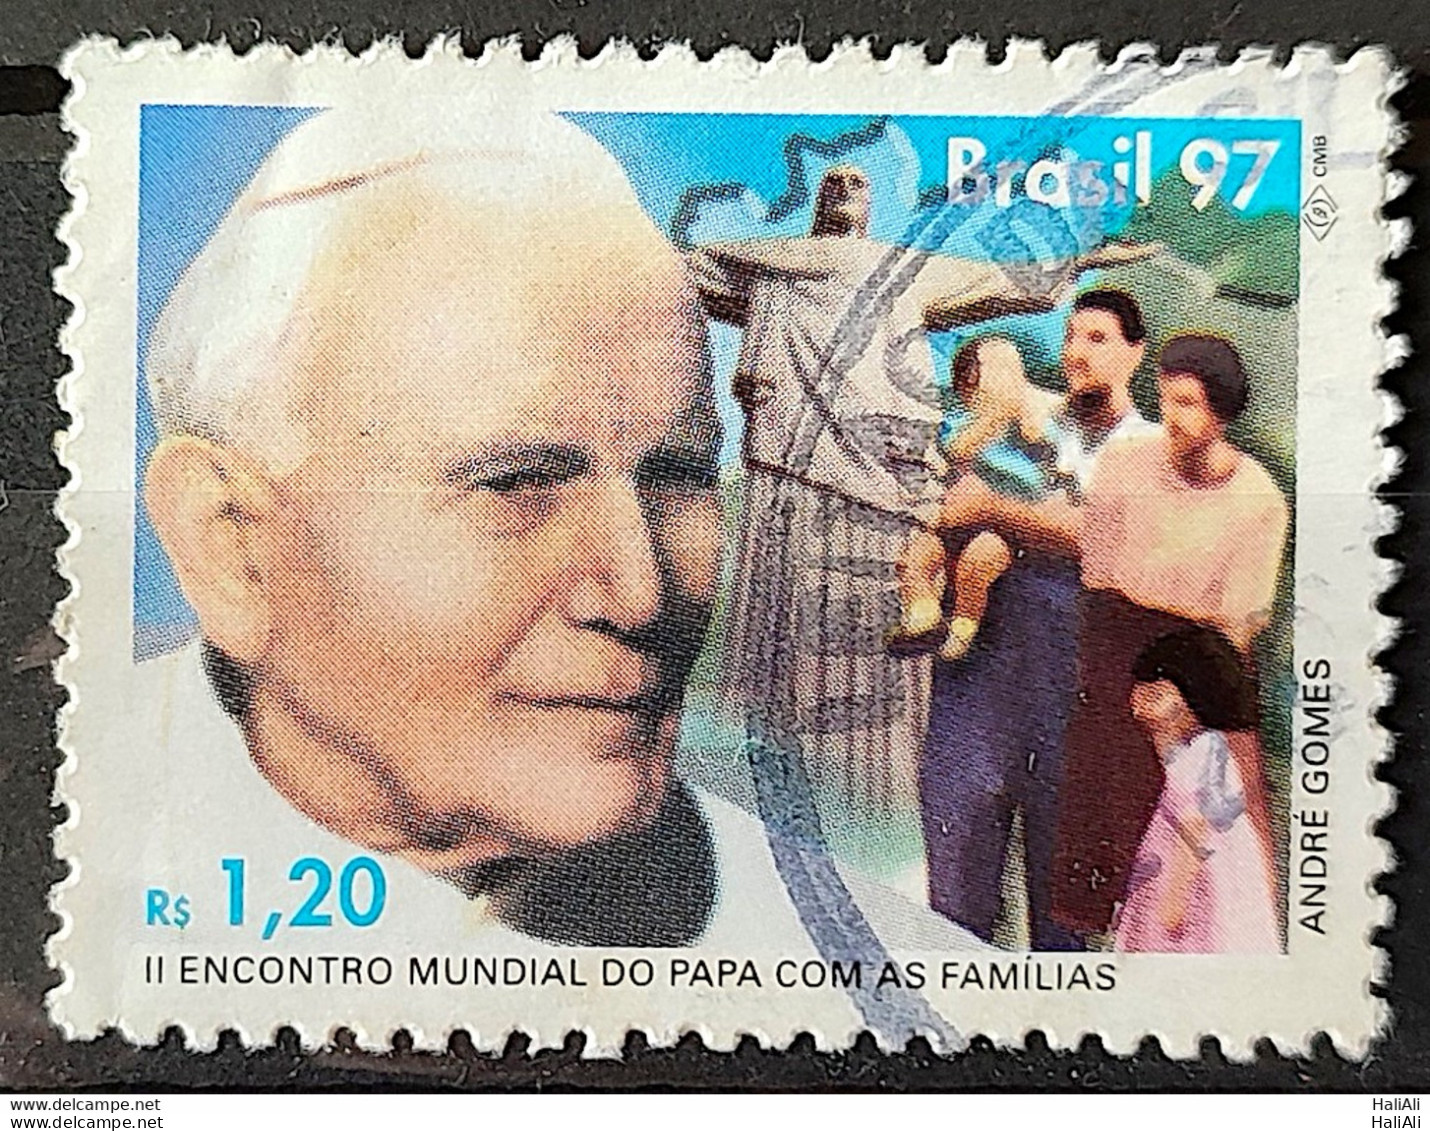 C 2043 Brazil Stamp World Pope Meeting With Families Religion 1997 Circulated 8 - Used Stamps